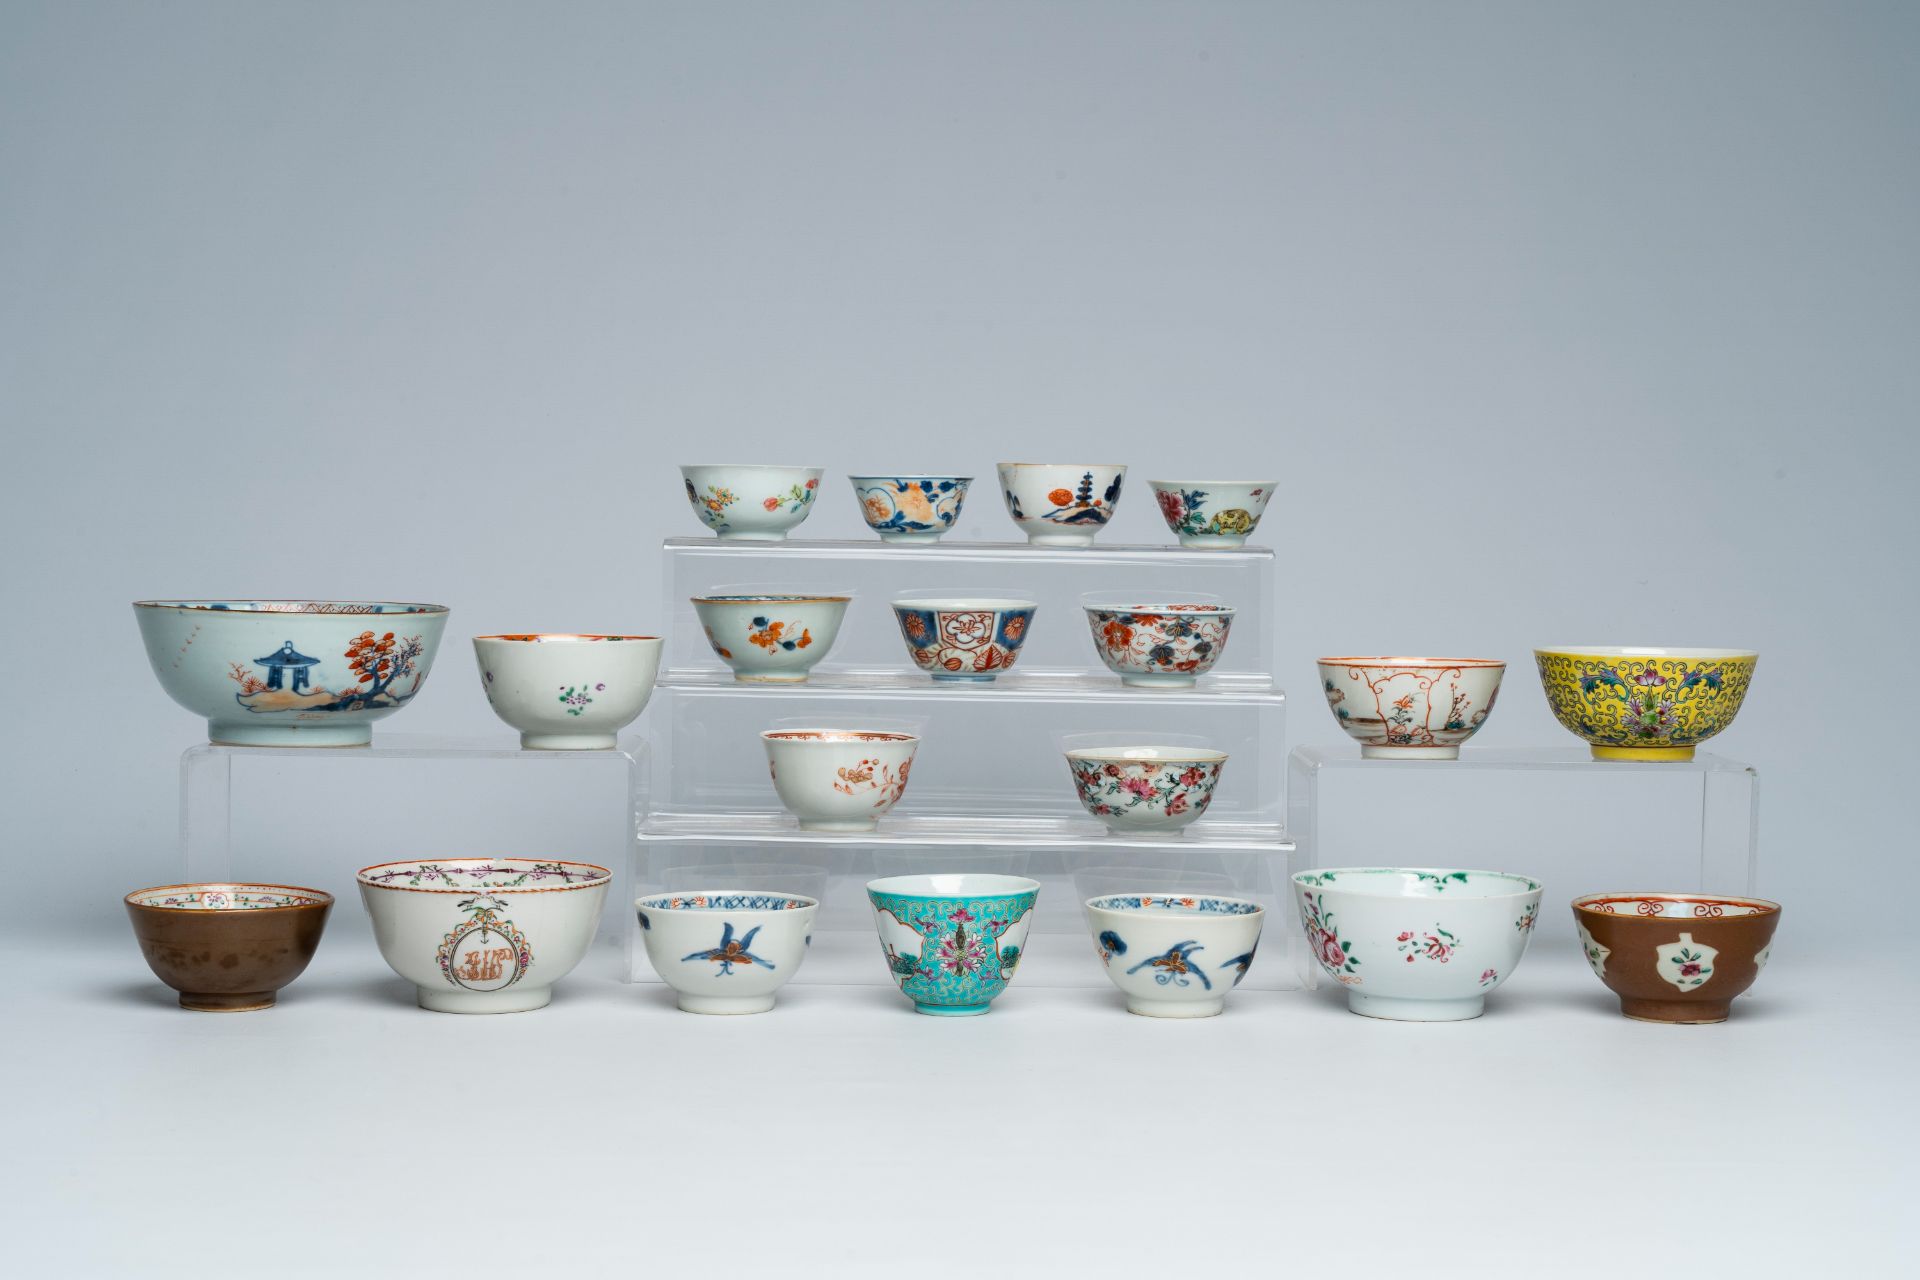 A varied collection of Chinese cups and saucers with various designs, 18th C. and later - Image 5 of 11